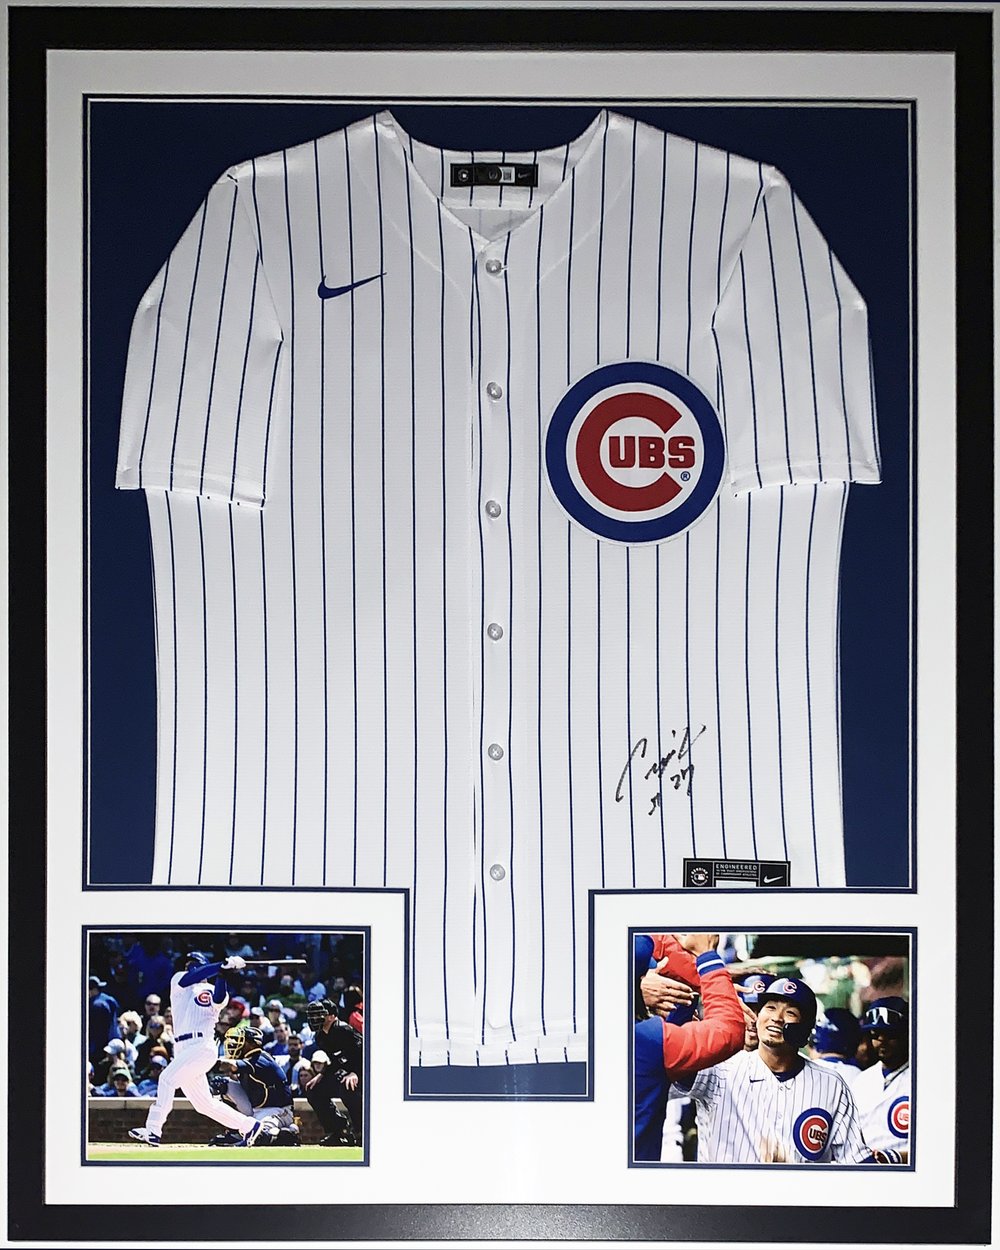 Framed Kyle Hendricks Chicago Cubs Autographed Blue Nike Authentic Jersey